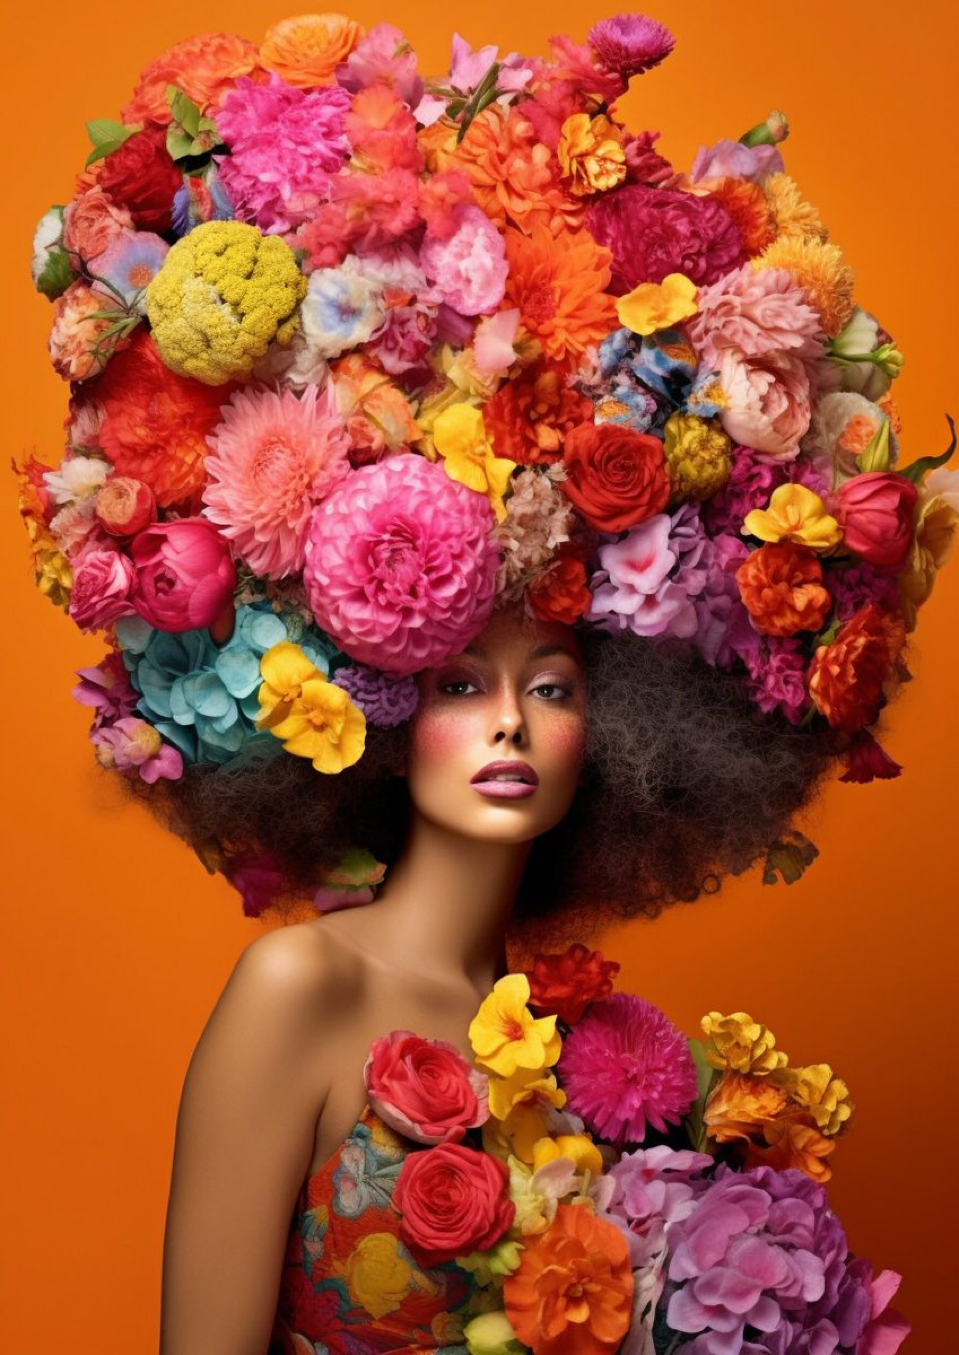 Uber model with hair full of blooming flowers in the style of Arcimbolo, bloomcore, flowercore